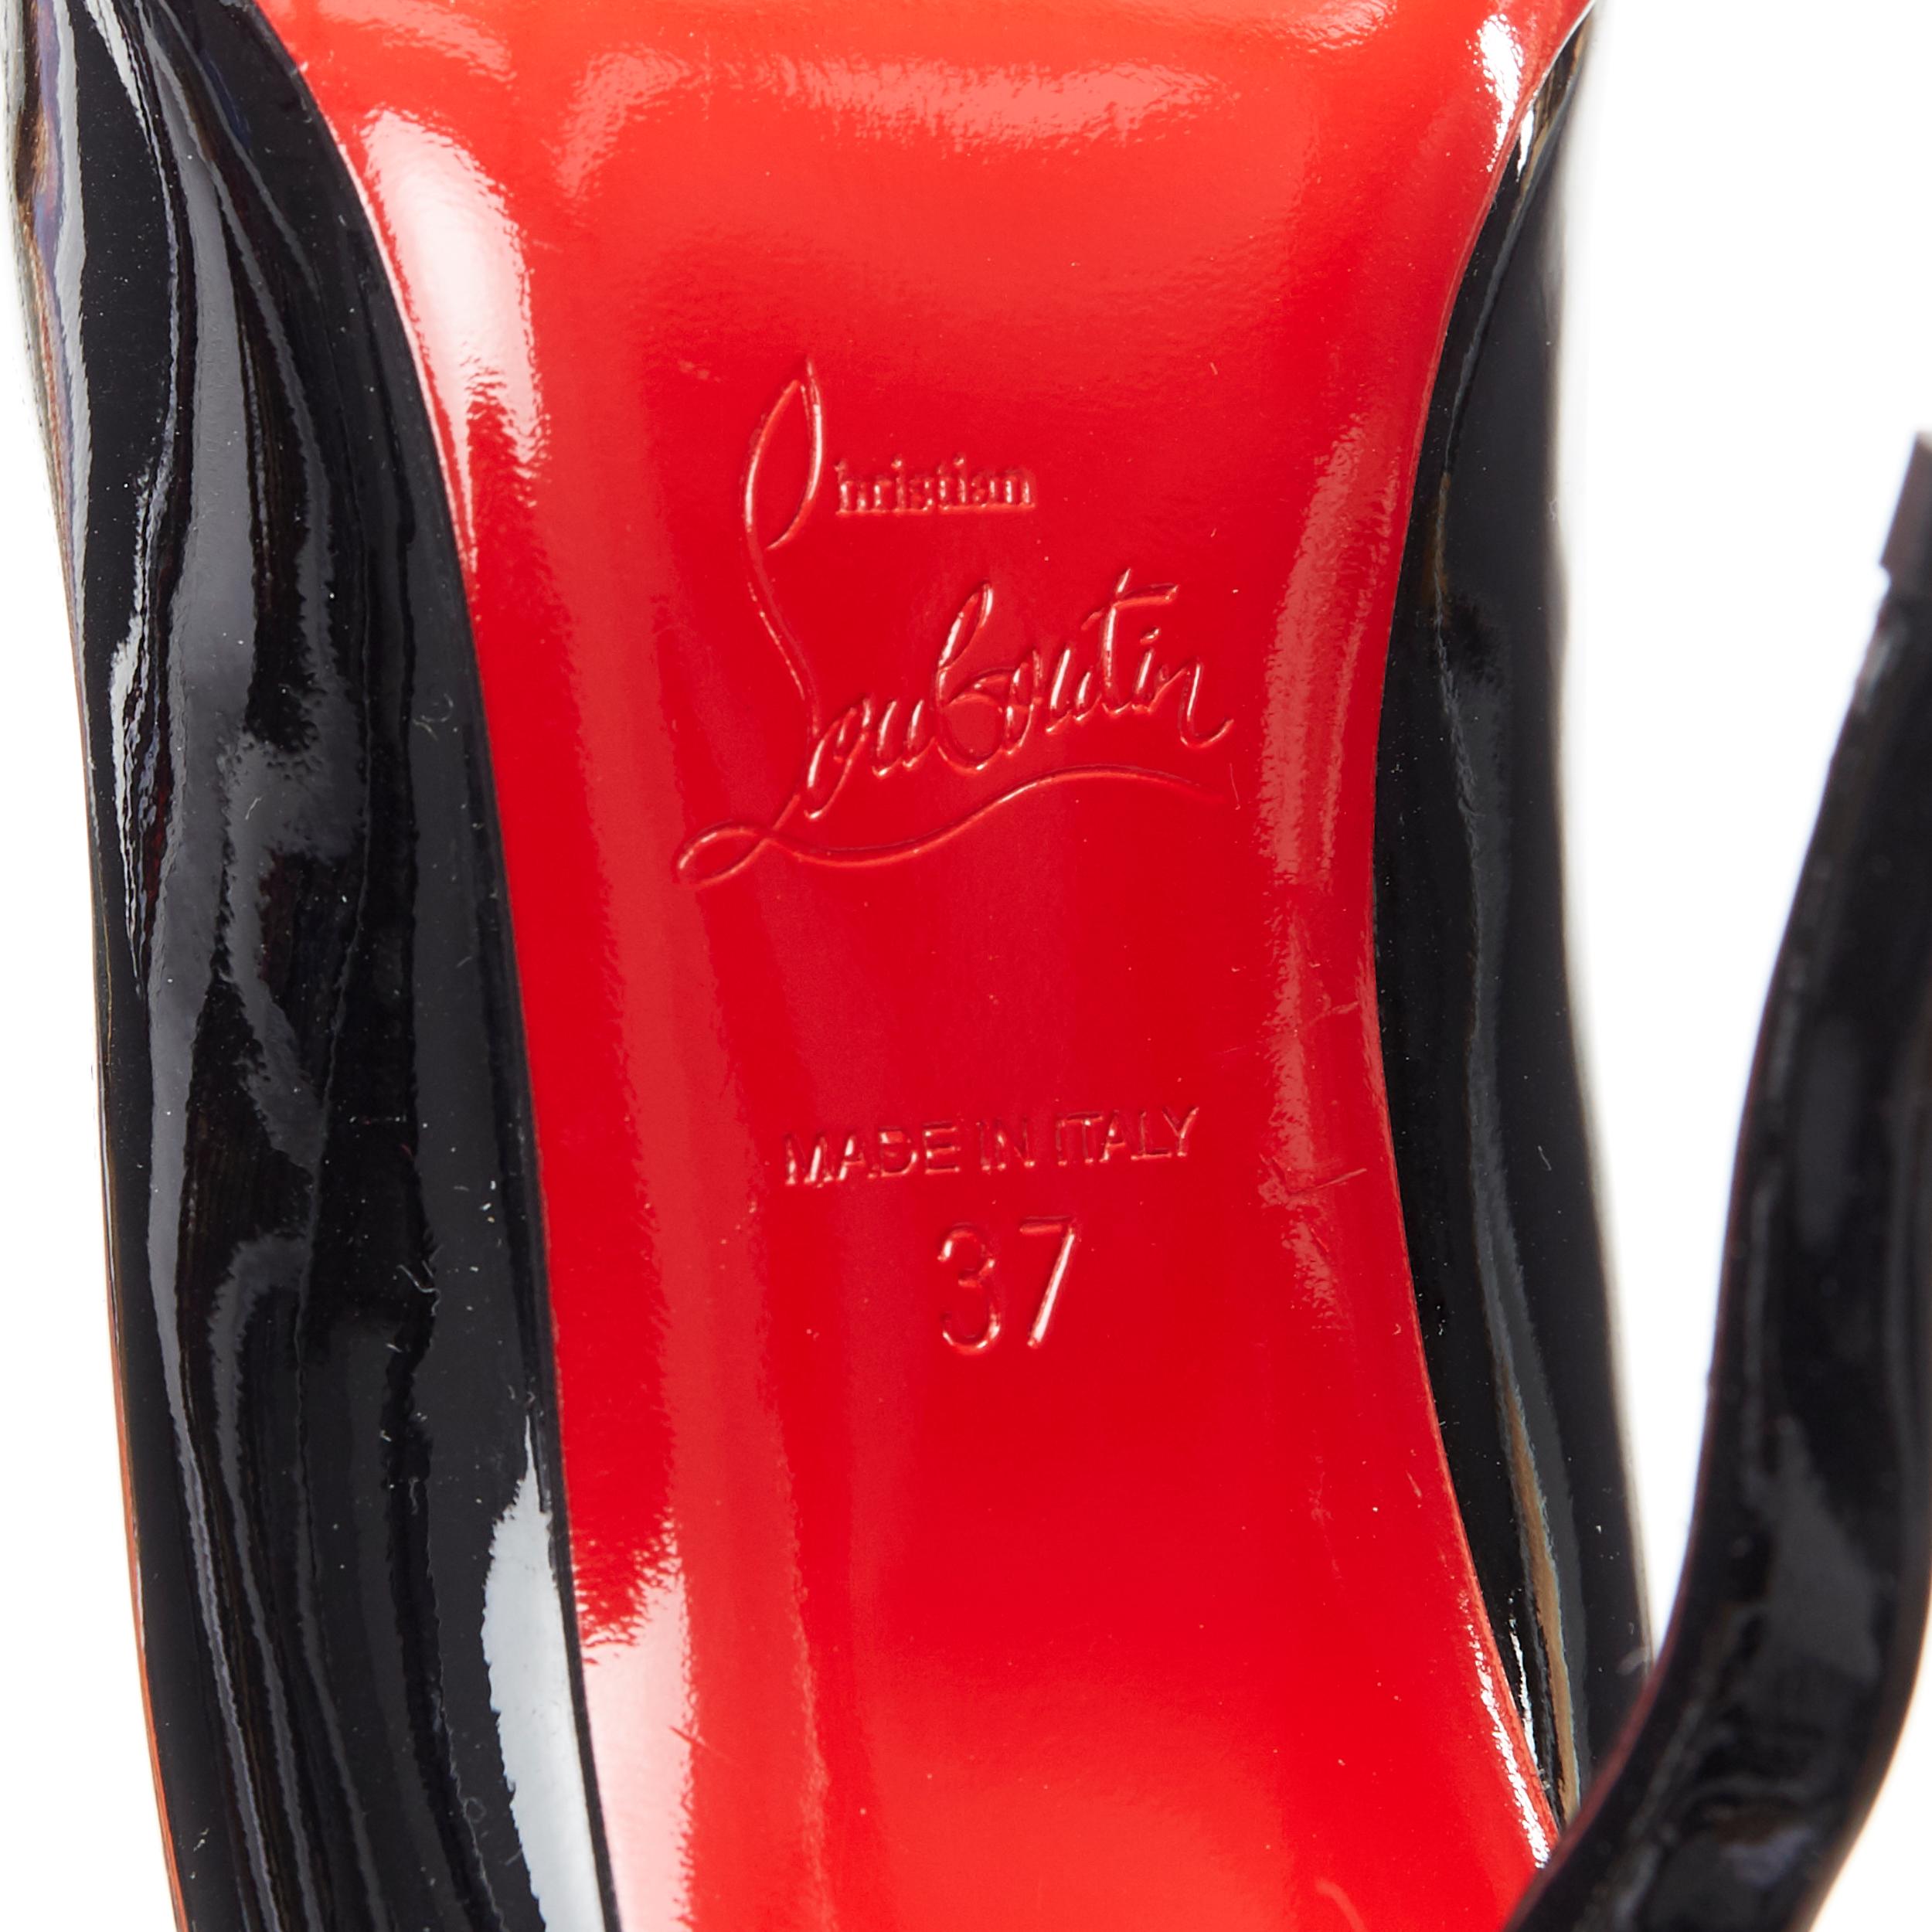 new CHRISTIAN LOUBOUTIN Wawy Dolly 100 black patent squiggly heel pump EU37 3